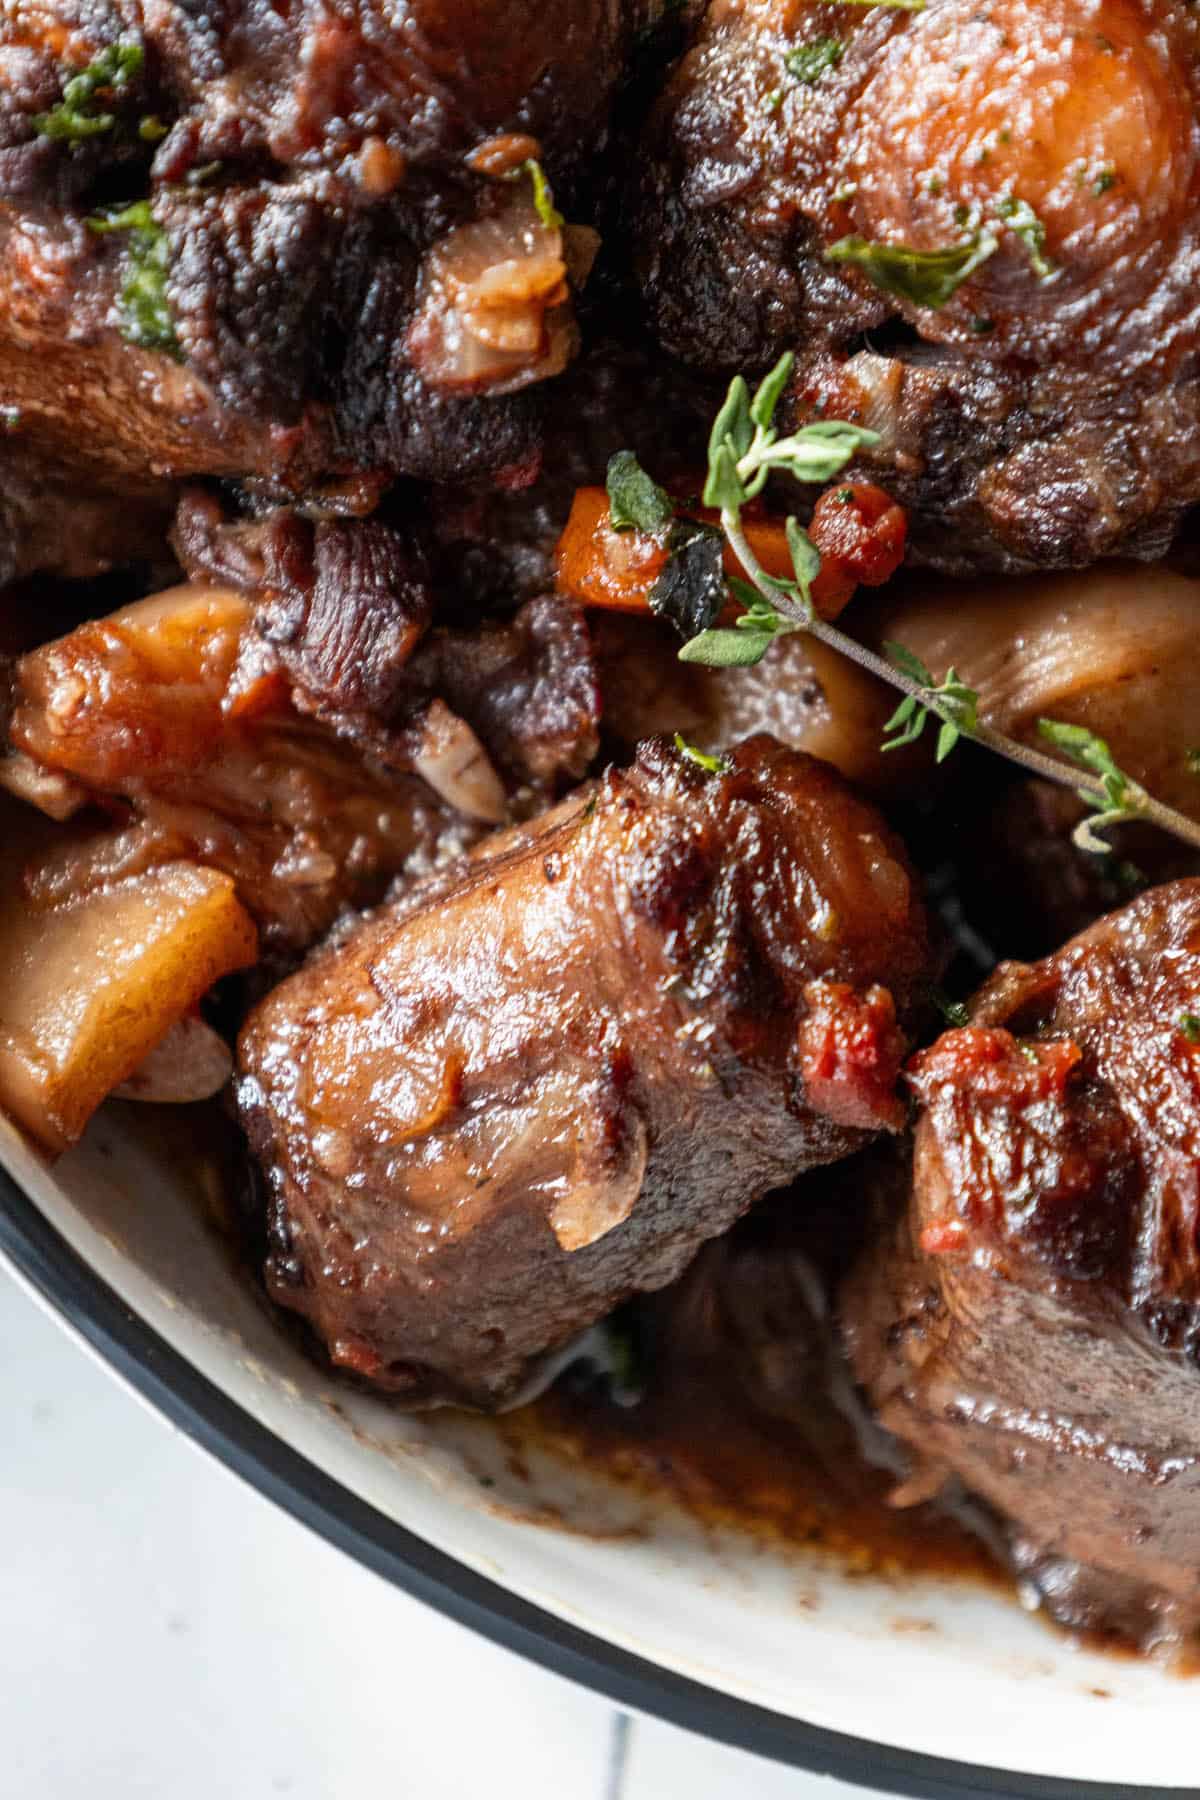 A bowl of stewed beef with apples and thyme, cooked as a Roasted Oxtail Stew.